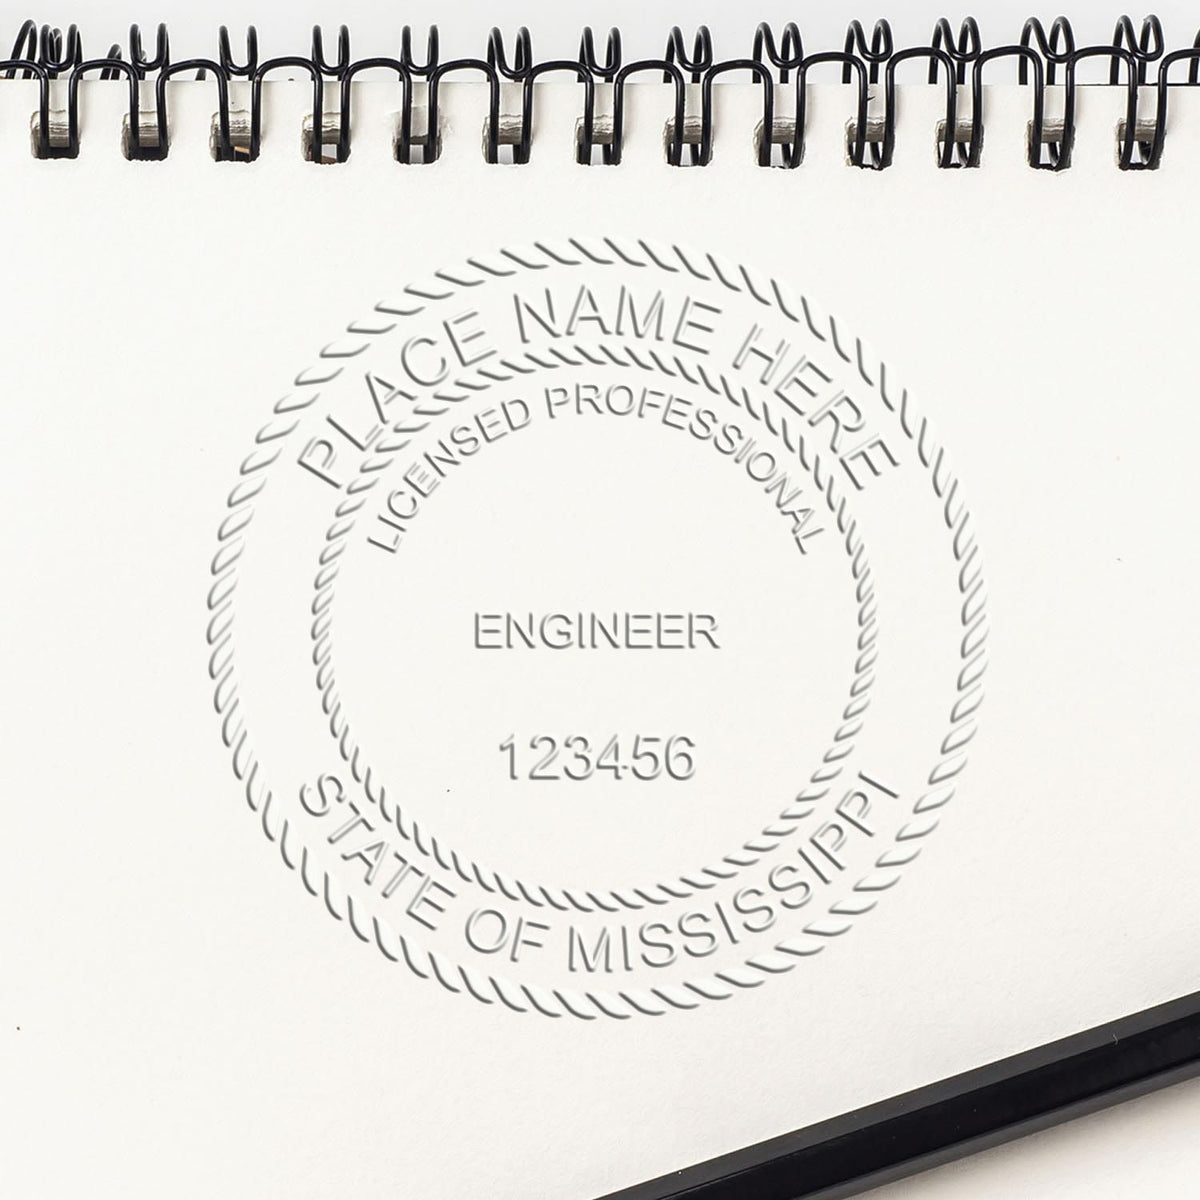 A stamped impression of the Mississippi Engineer Desk Seal in this stylish lifestyle photo, setting the tone for a unique and personalized product.